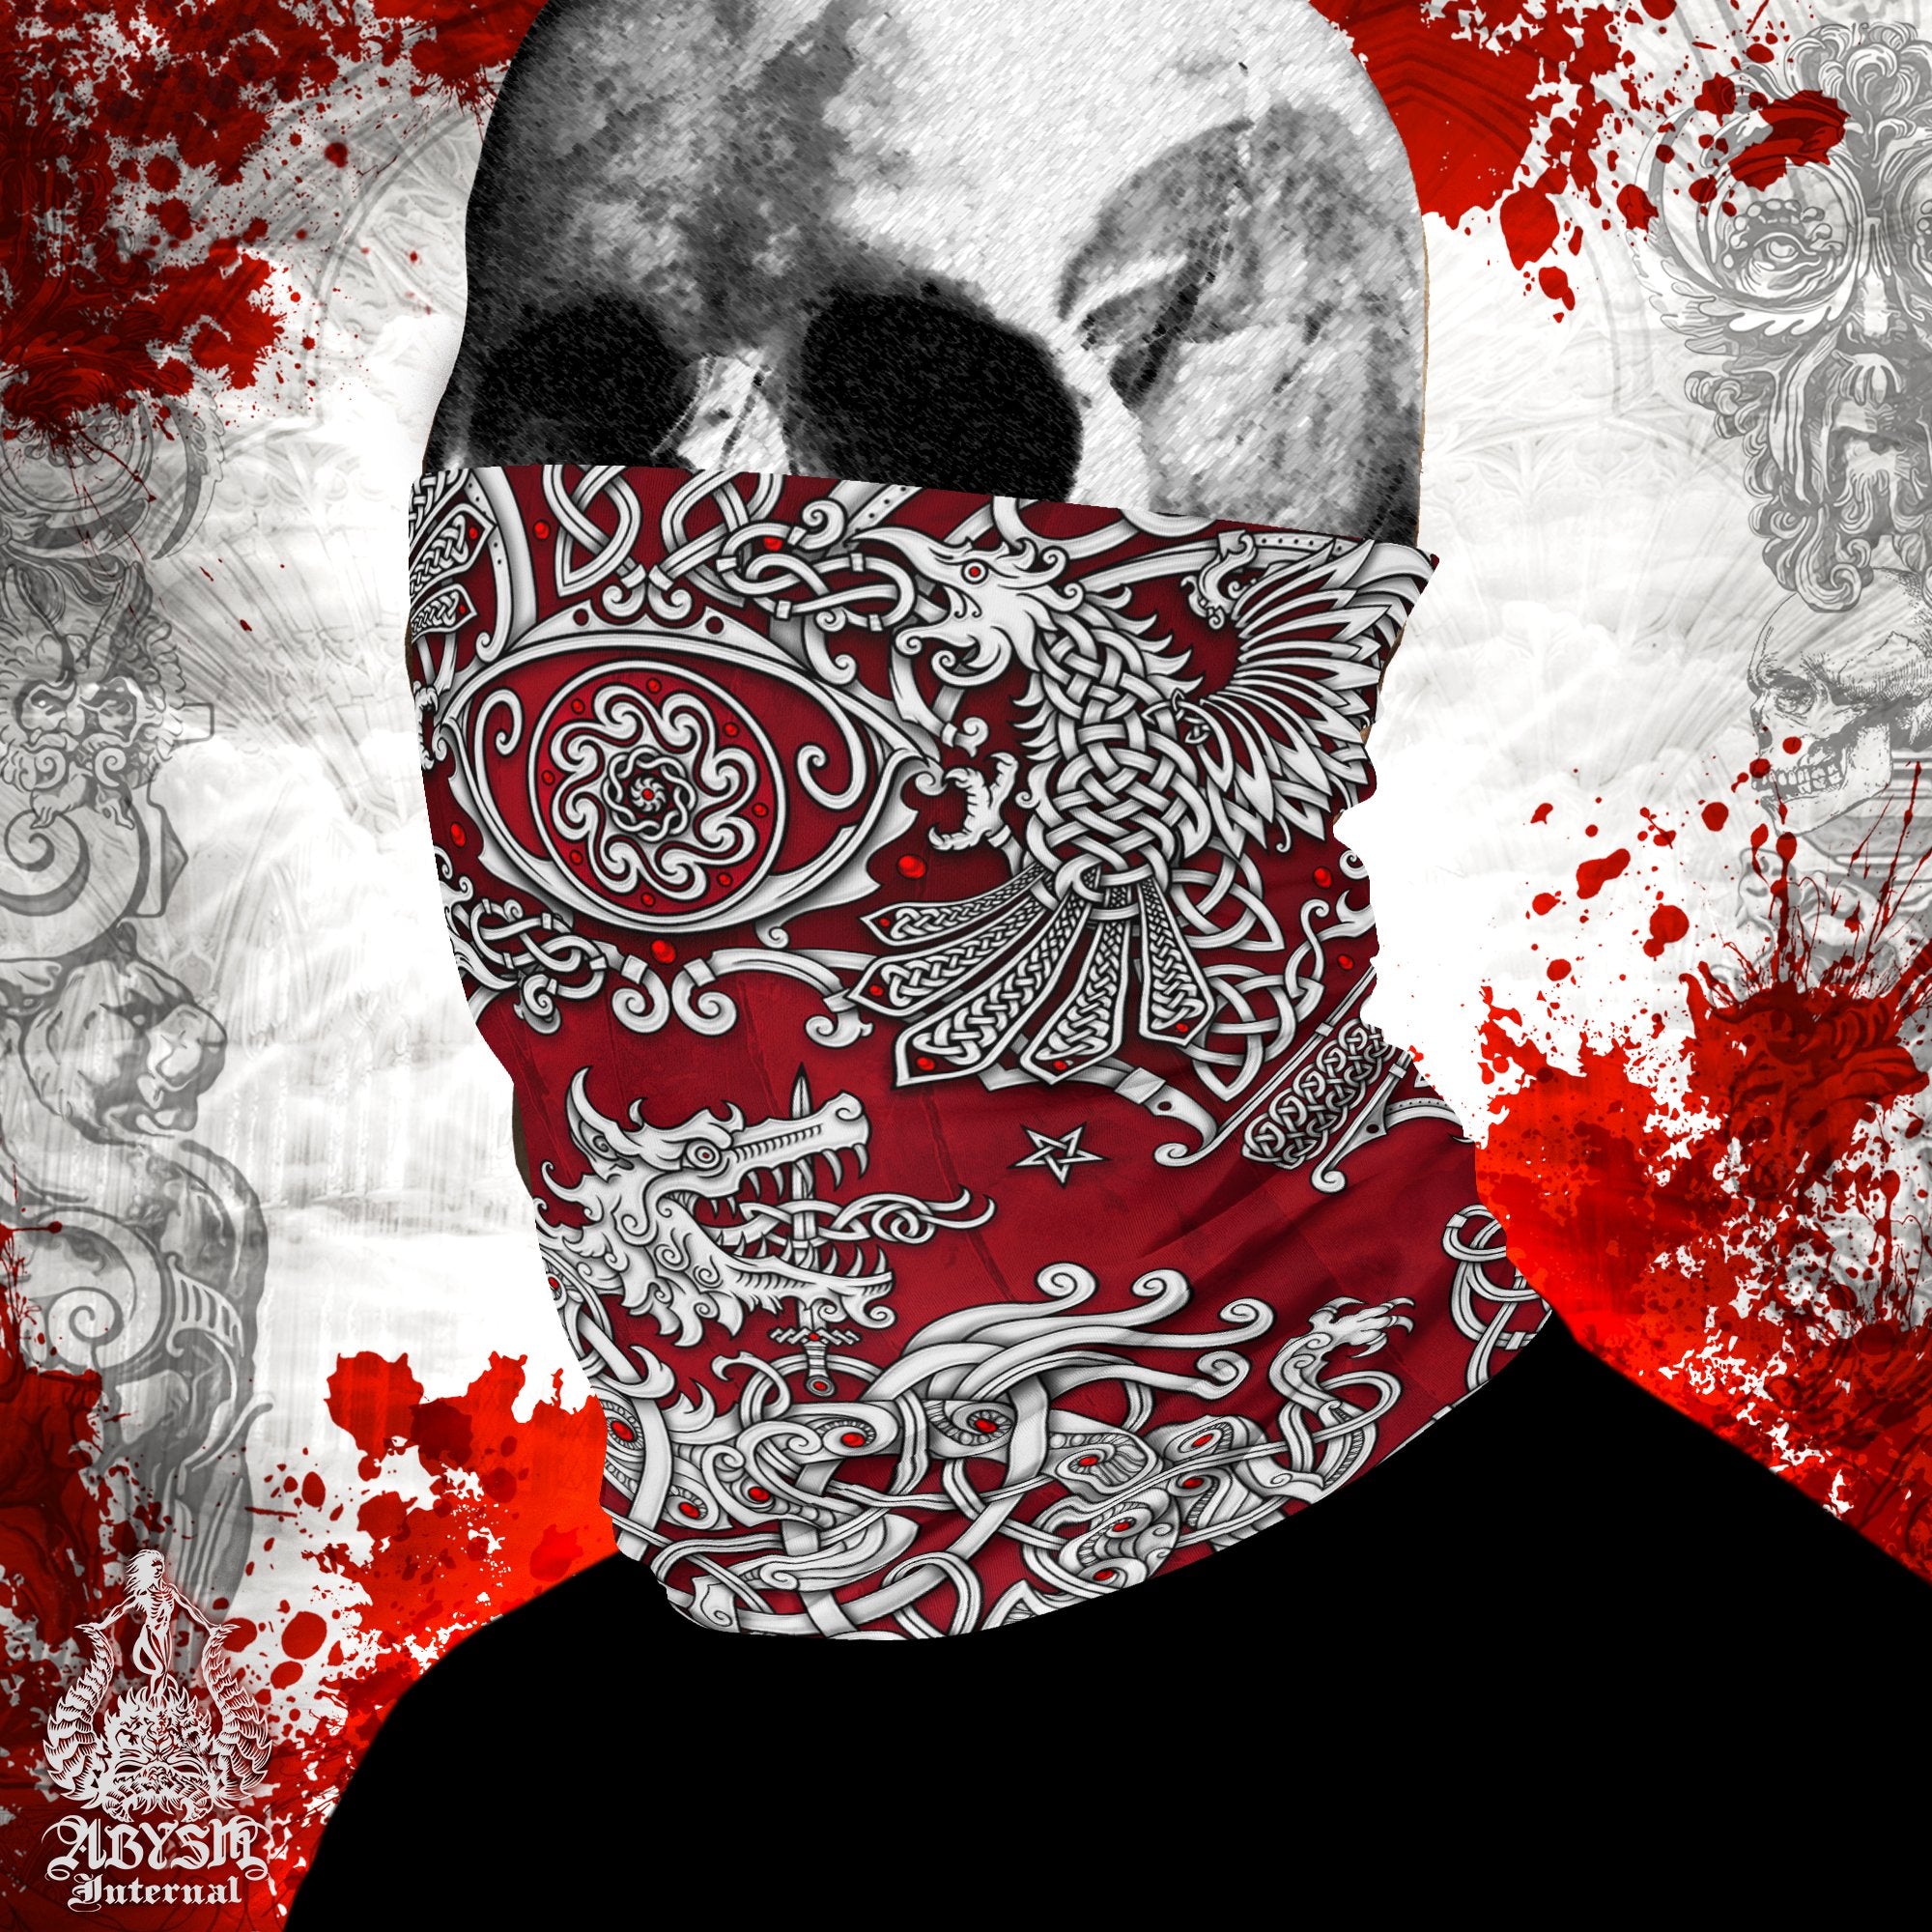 Viking Neck Gaiter, Fenrir Face Mask, Nordic Wolf Printed Head Covering, Norse Art - White, 3 Colors - Abysm Internal